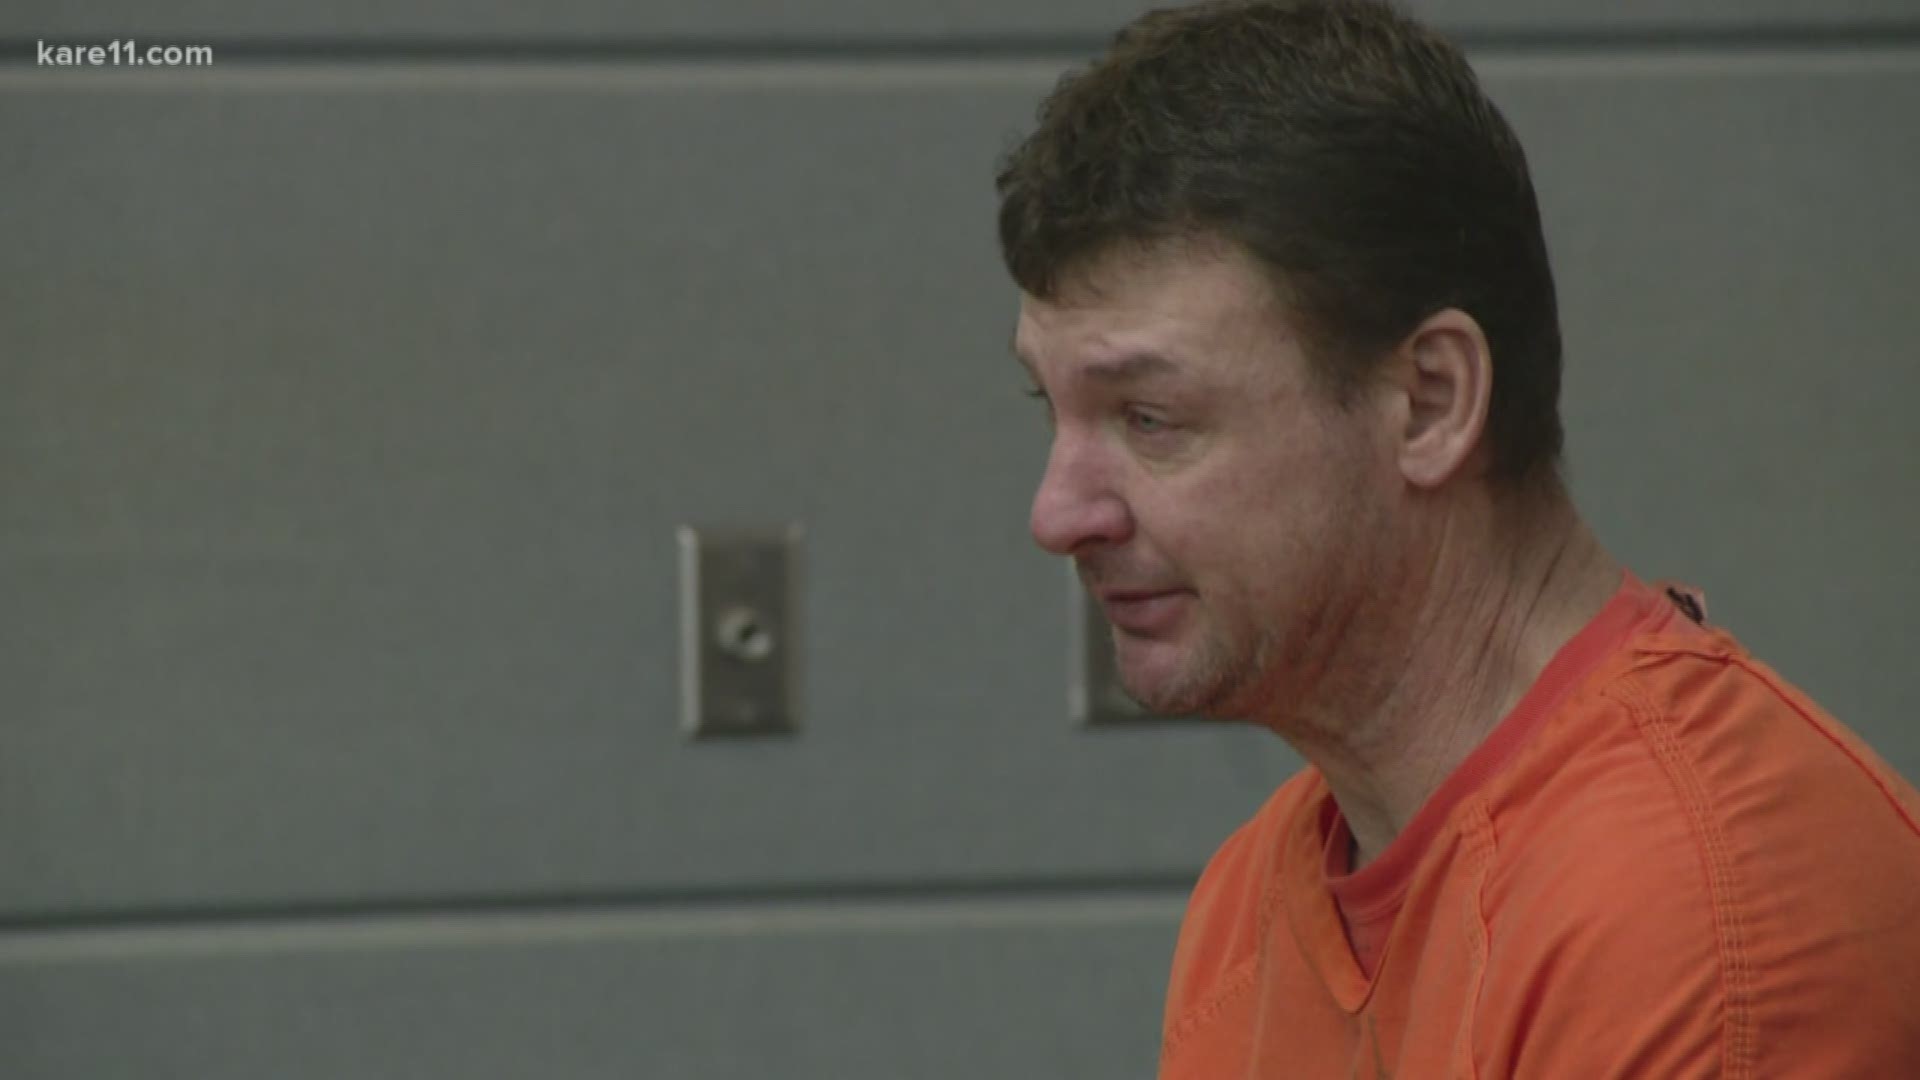 Chisago City man was sentenced to prison in connection with the drunken snowmobile crash that killed an 8-year-old boy on Chisago Lake.